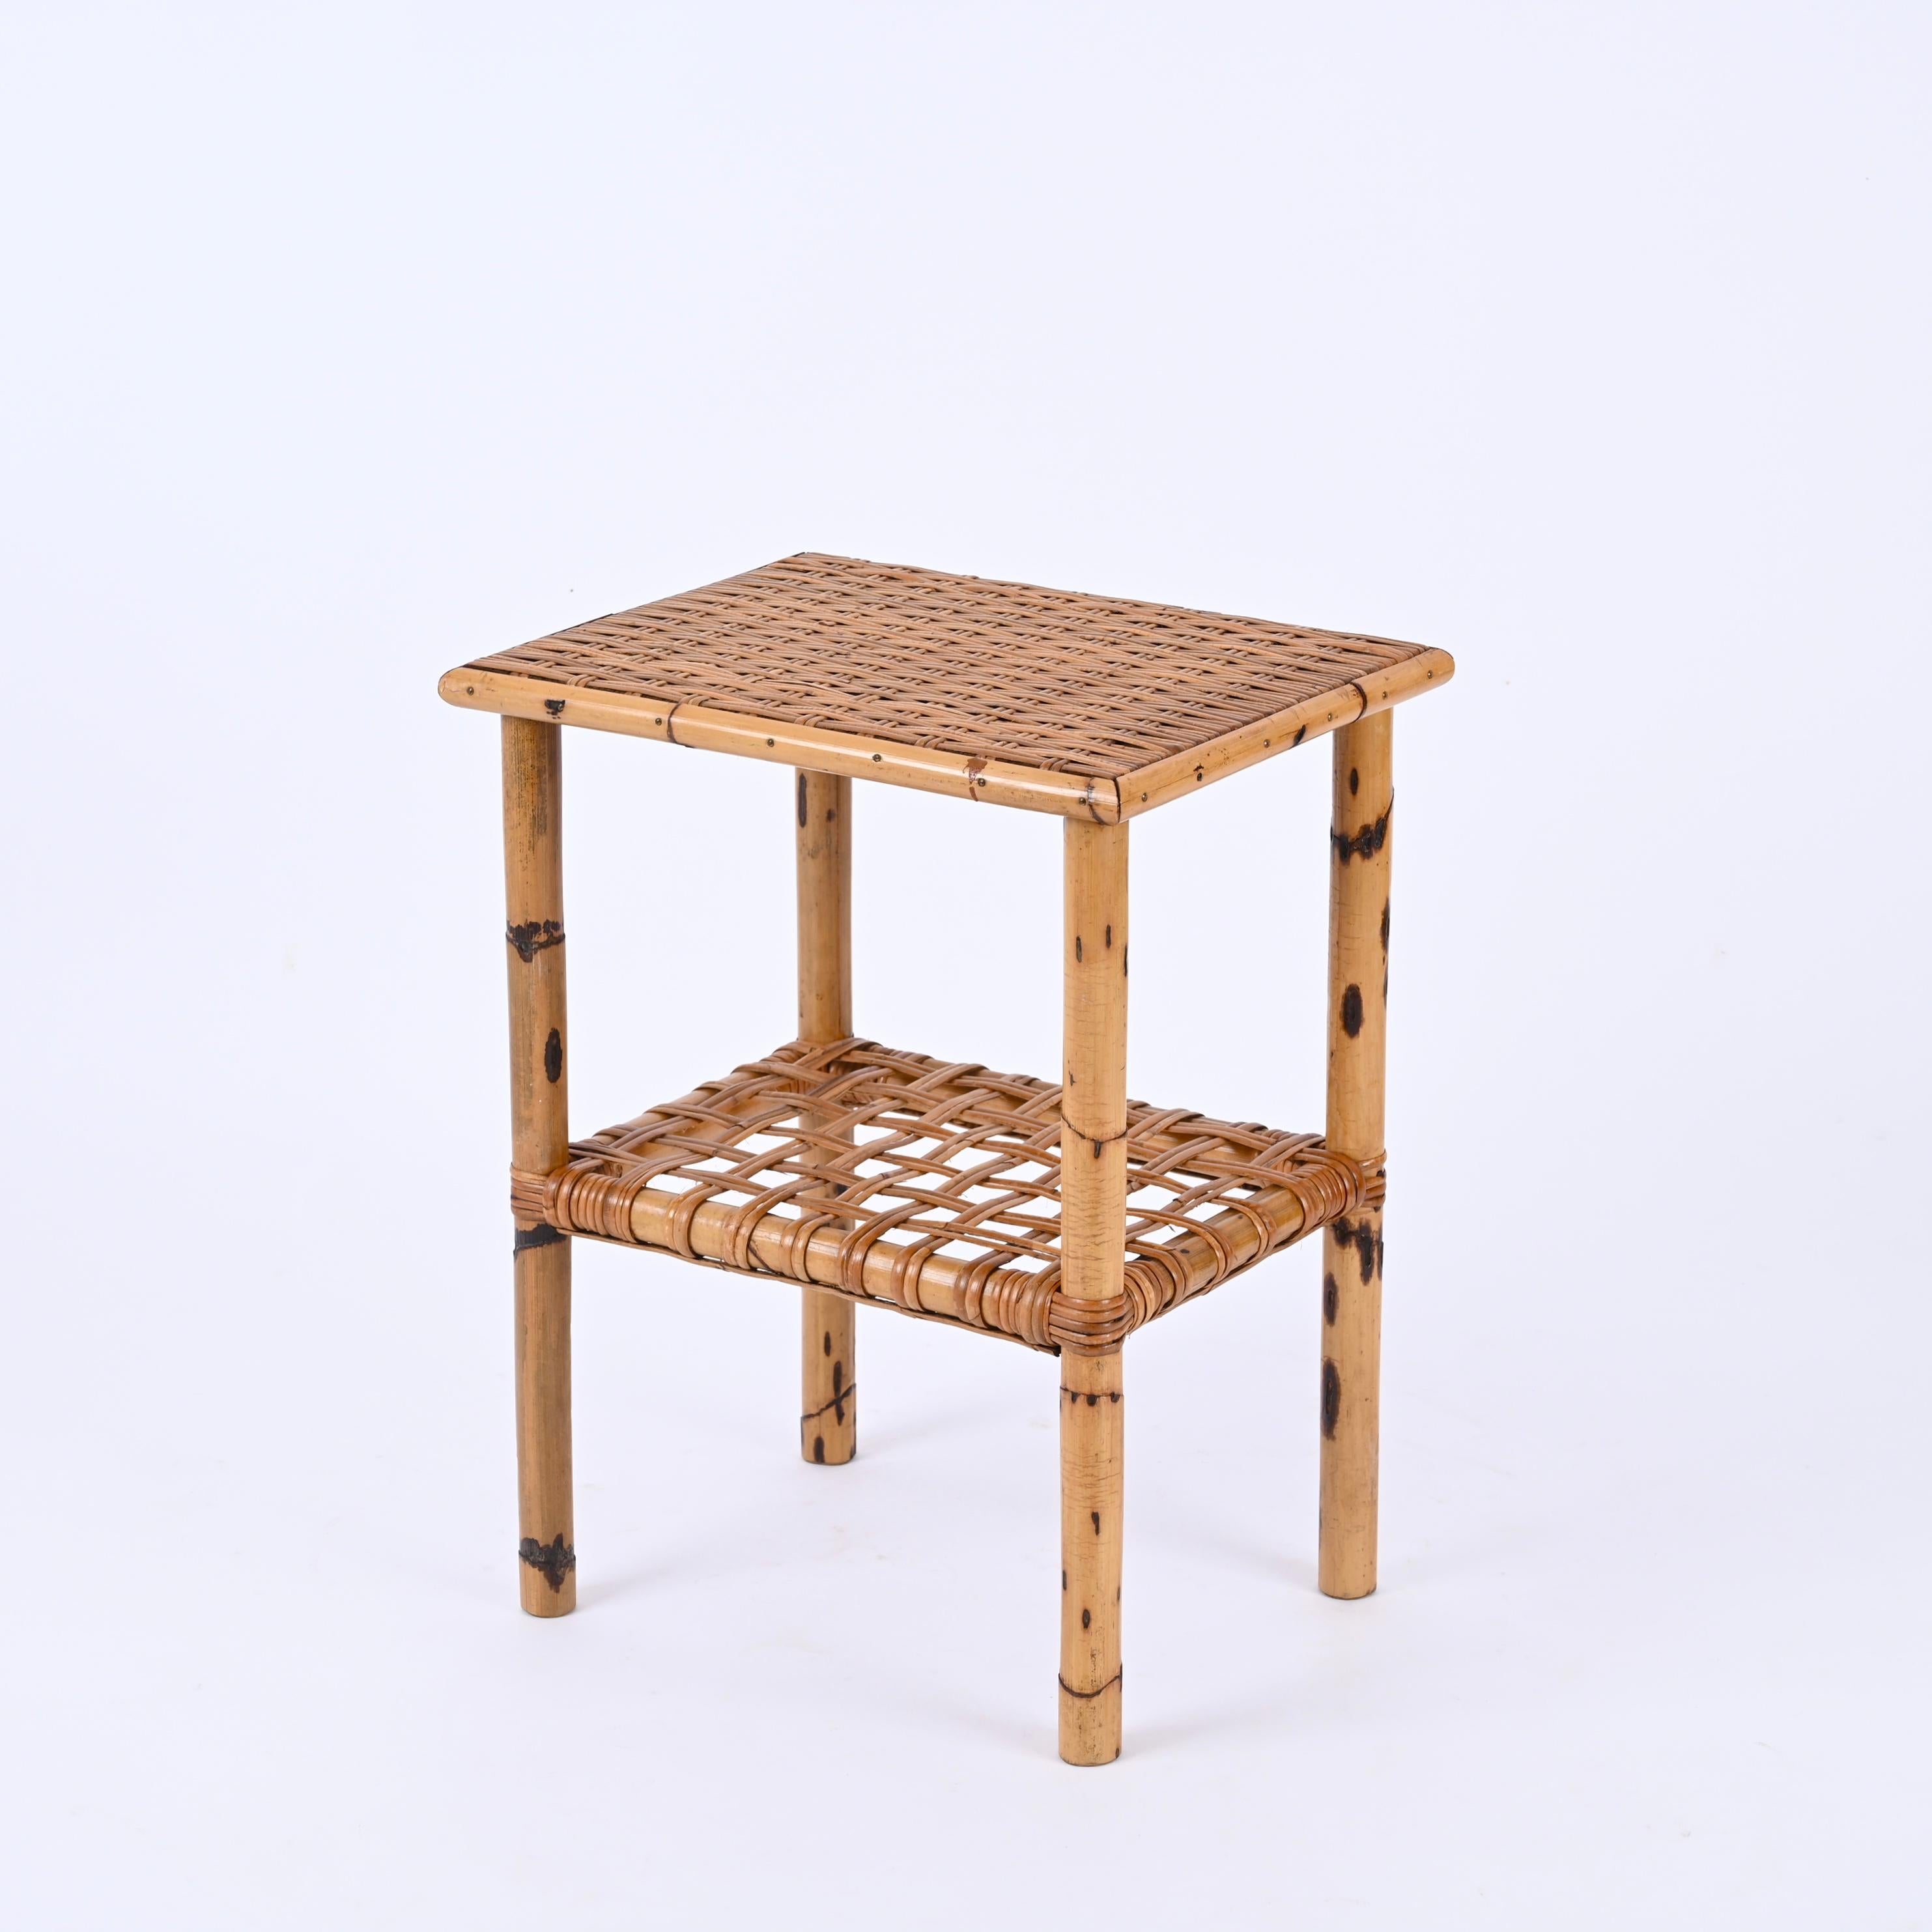 Midcentury Bamboo and Rattan Italian Coffee Table with Magazine Rack, 1960s For Sale 1